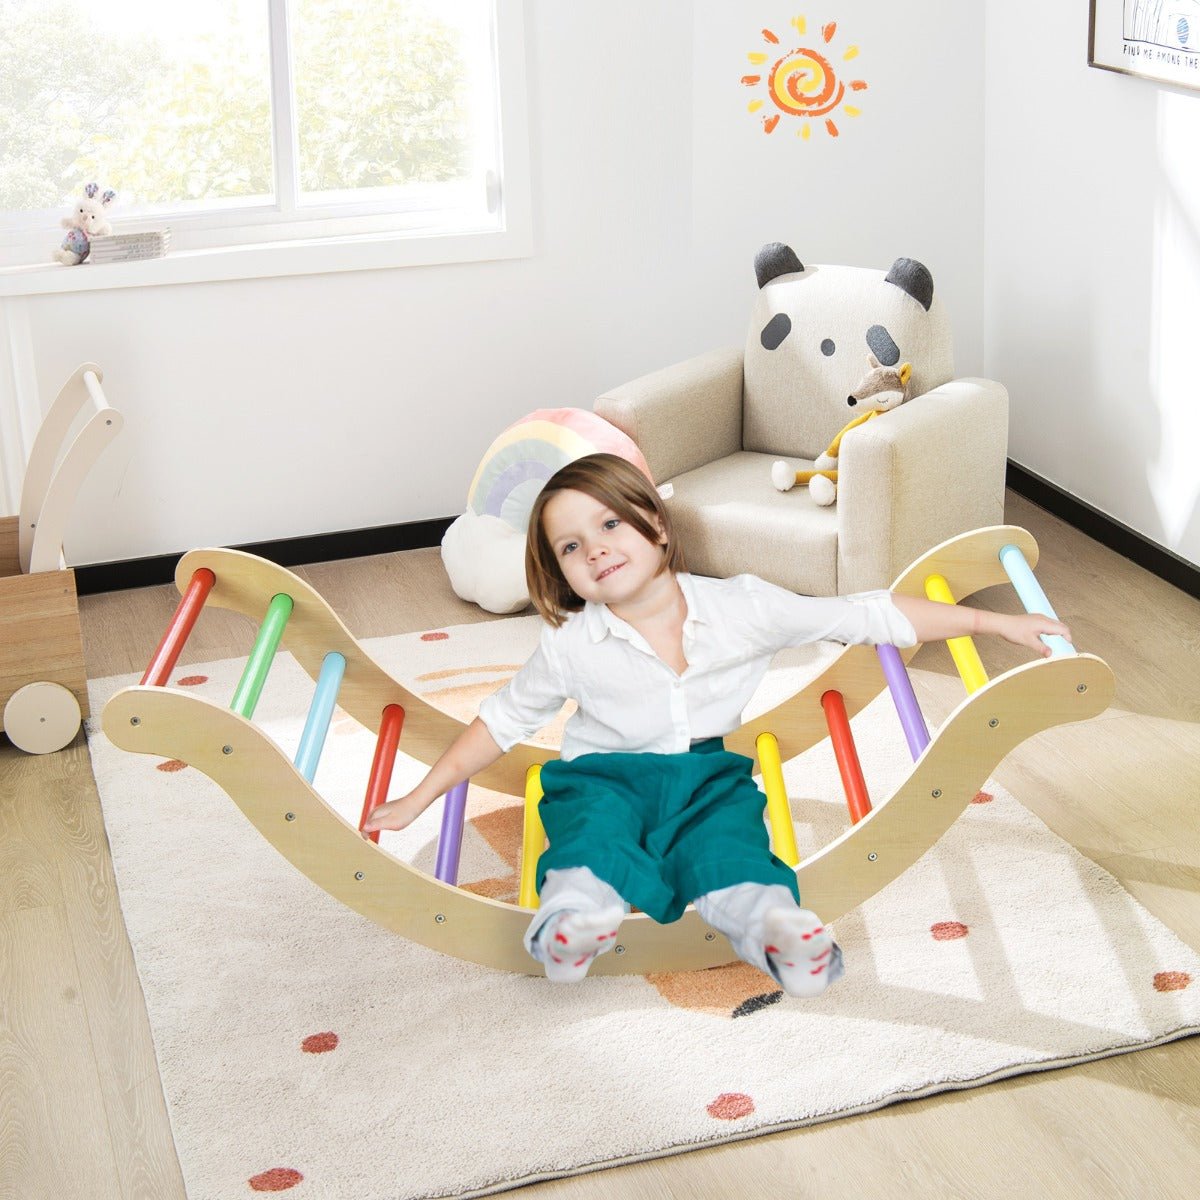 Kids' Adventure Paradise with Our Climber Set